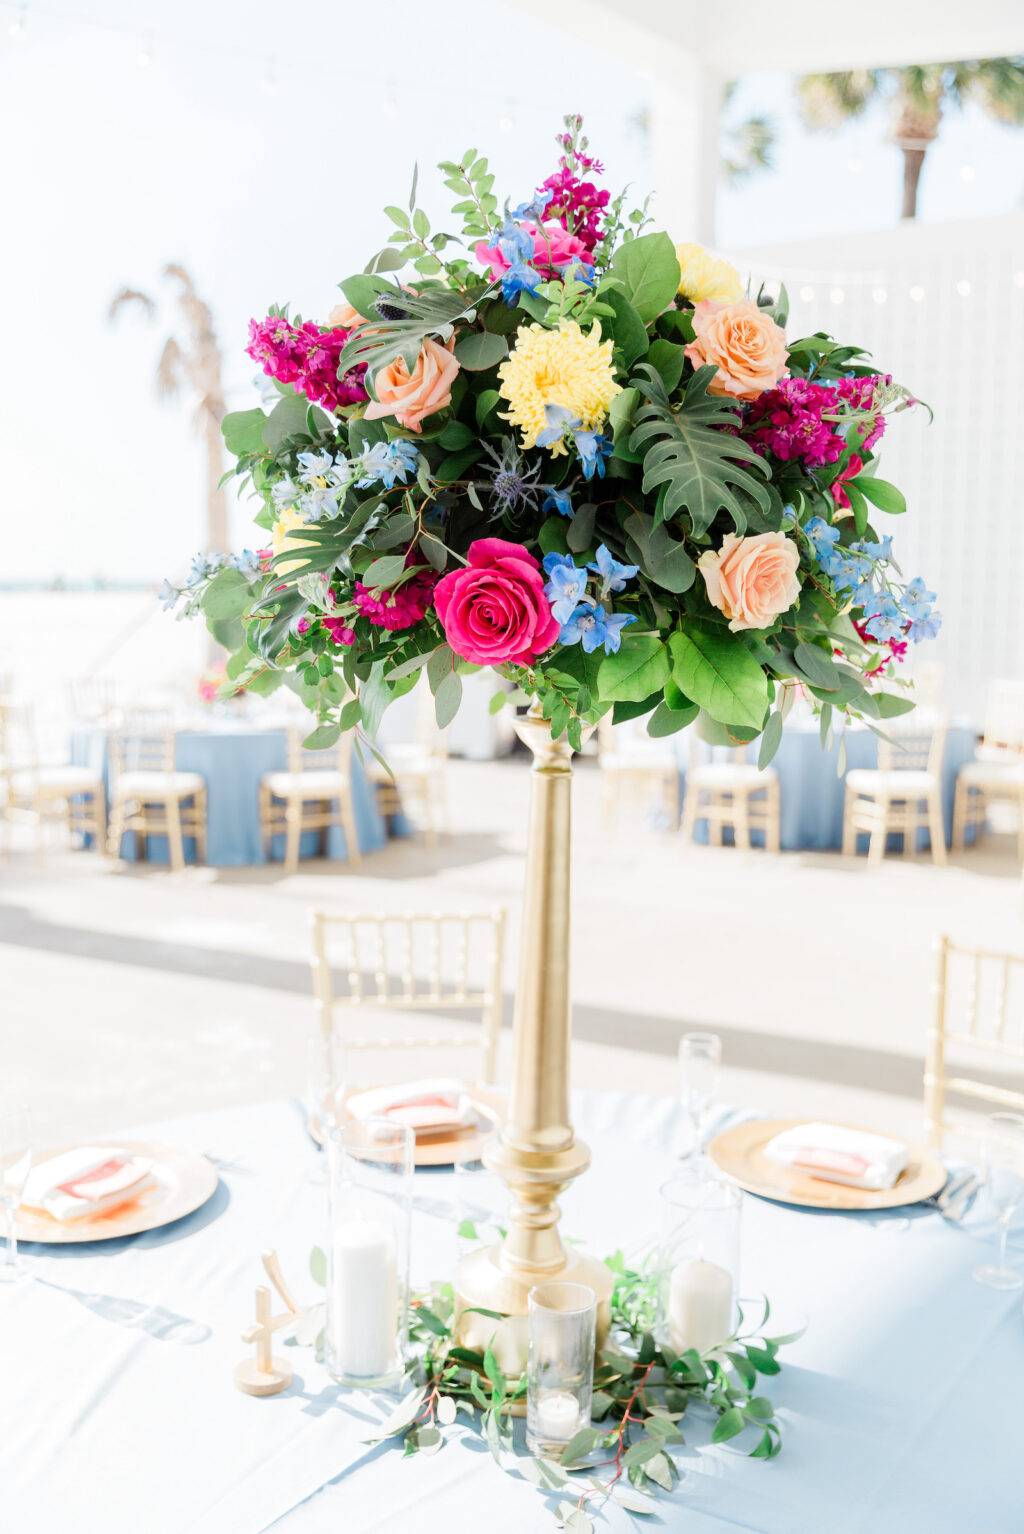 Tall Floral Centerpieces with Pink, Peach, Yellow andBaby Blue Florals and Greenery in Tall Gold Vase